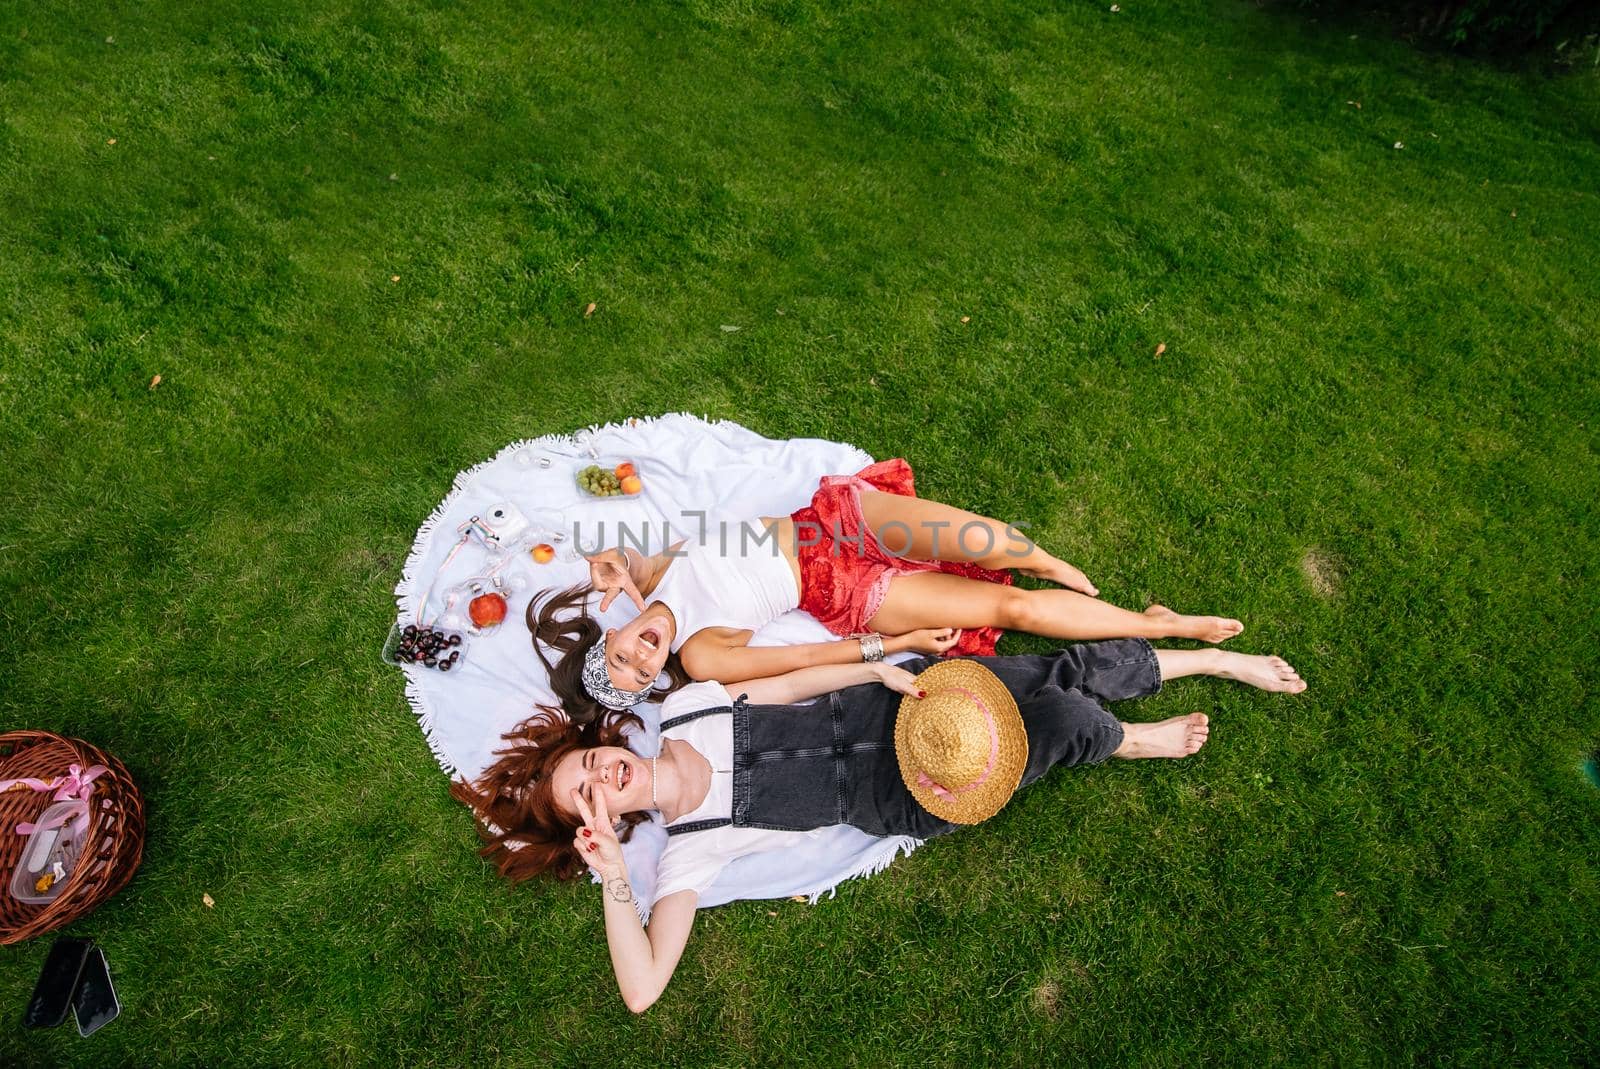 Two women having picnic together, laying on the plaid on the lawn